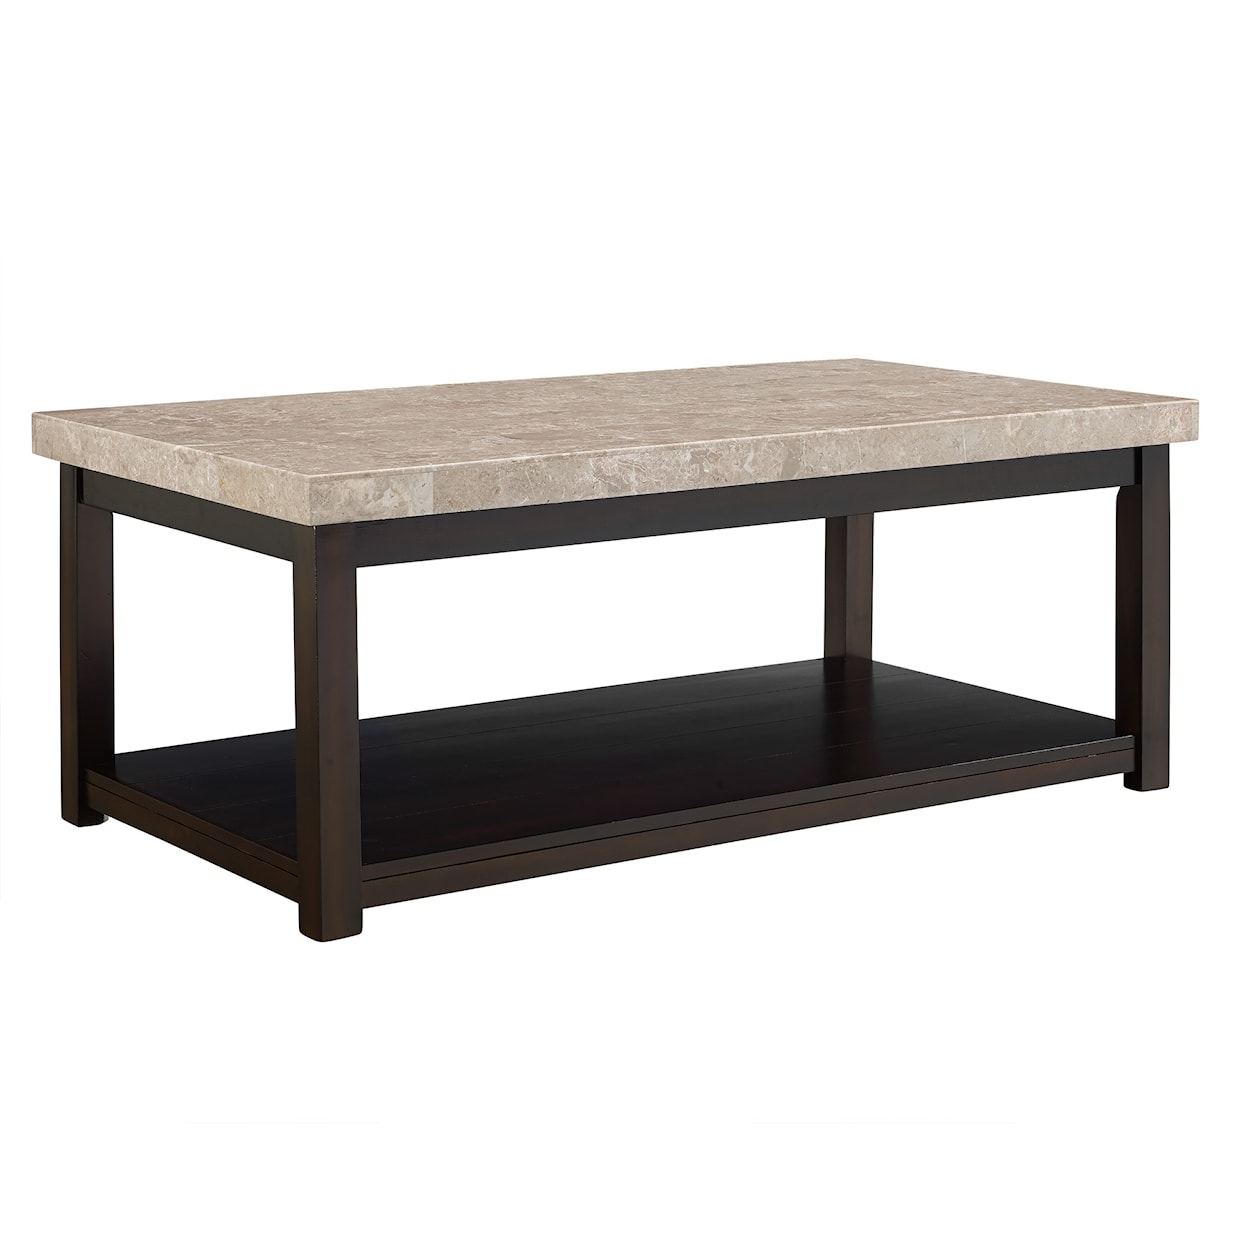 Elements International Lawerence LAWERENCE BEIGE MARBLE COFFEE TABLE |